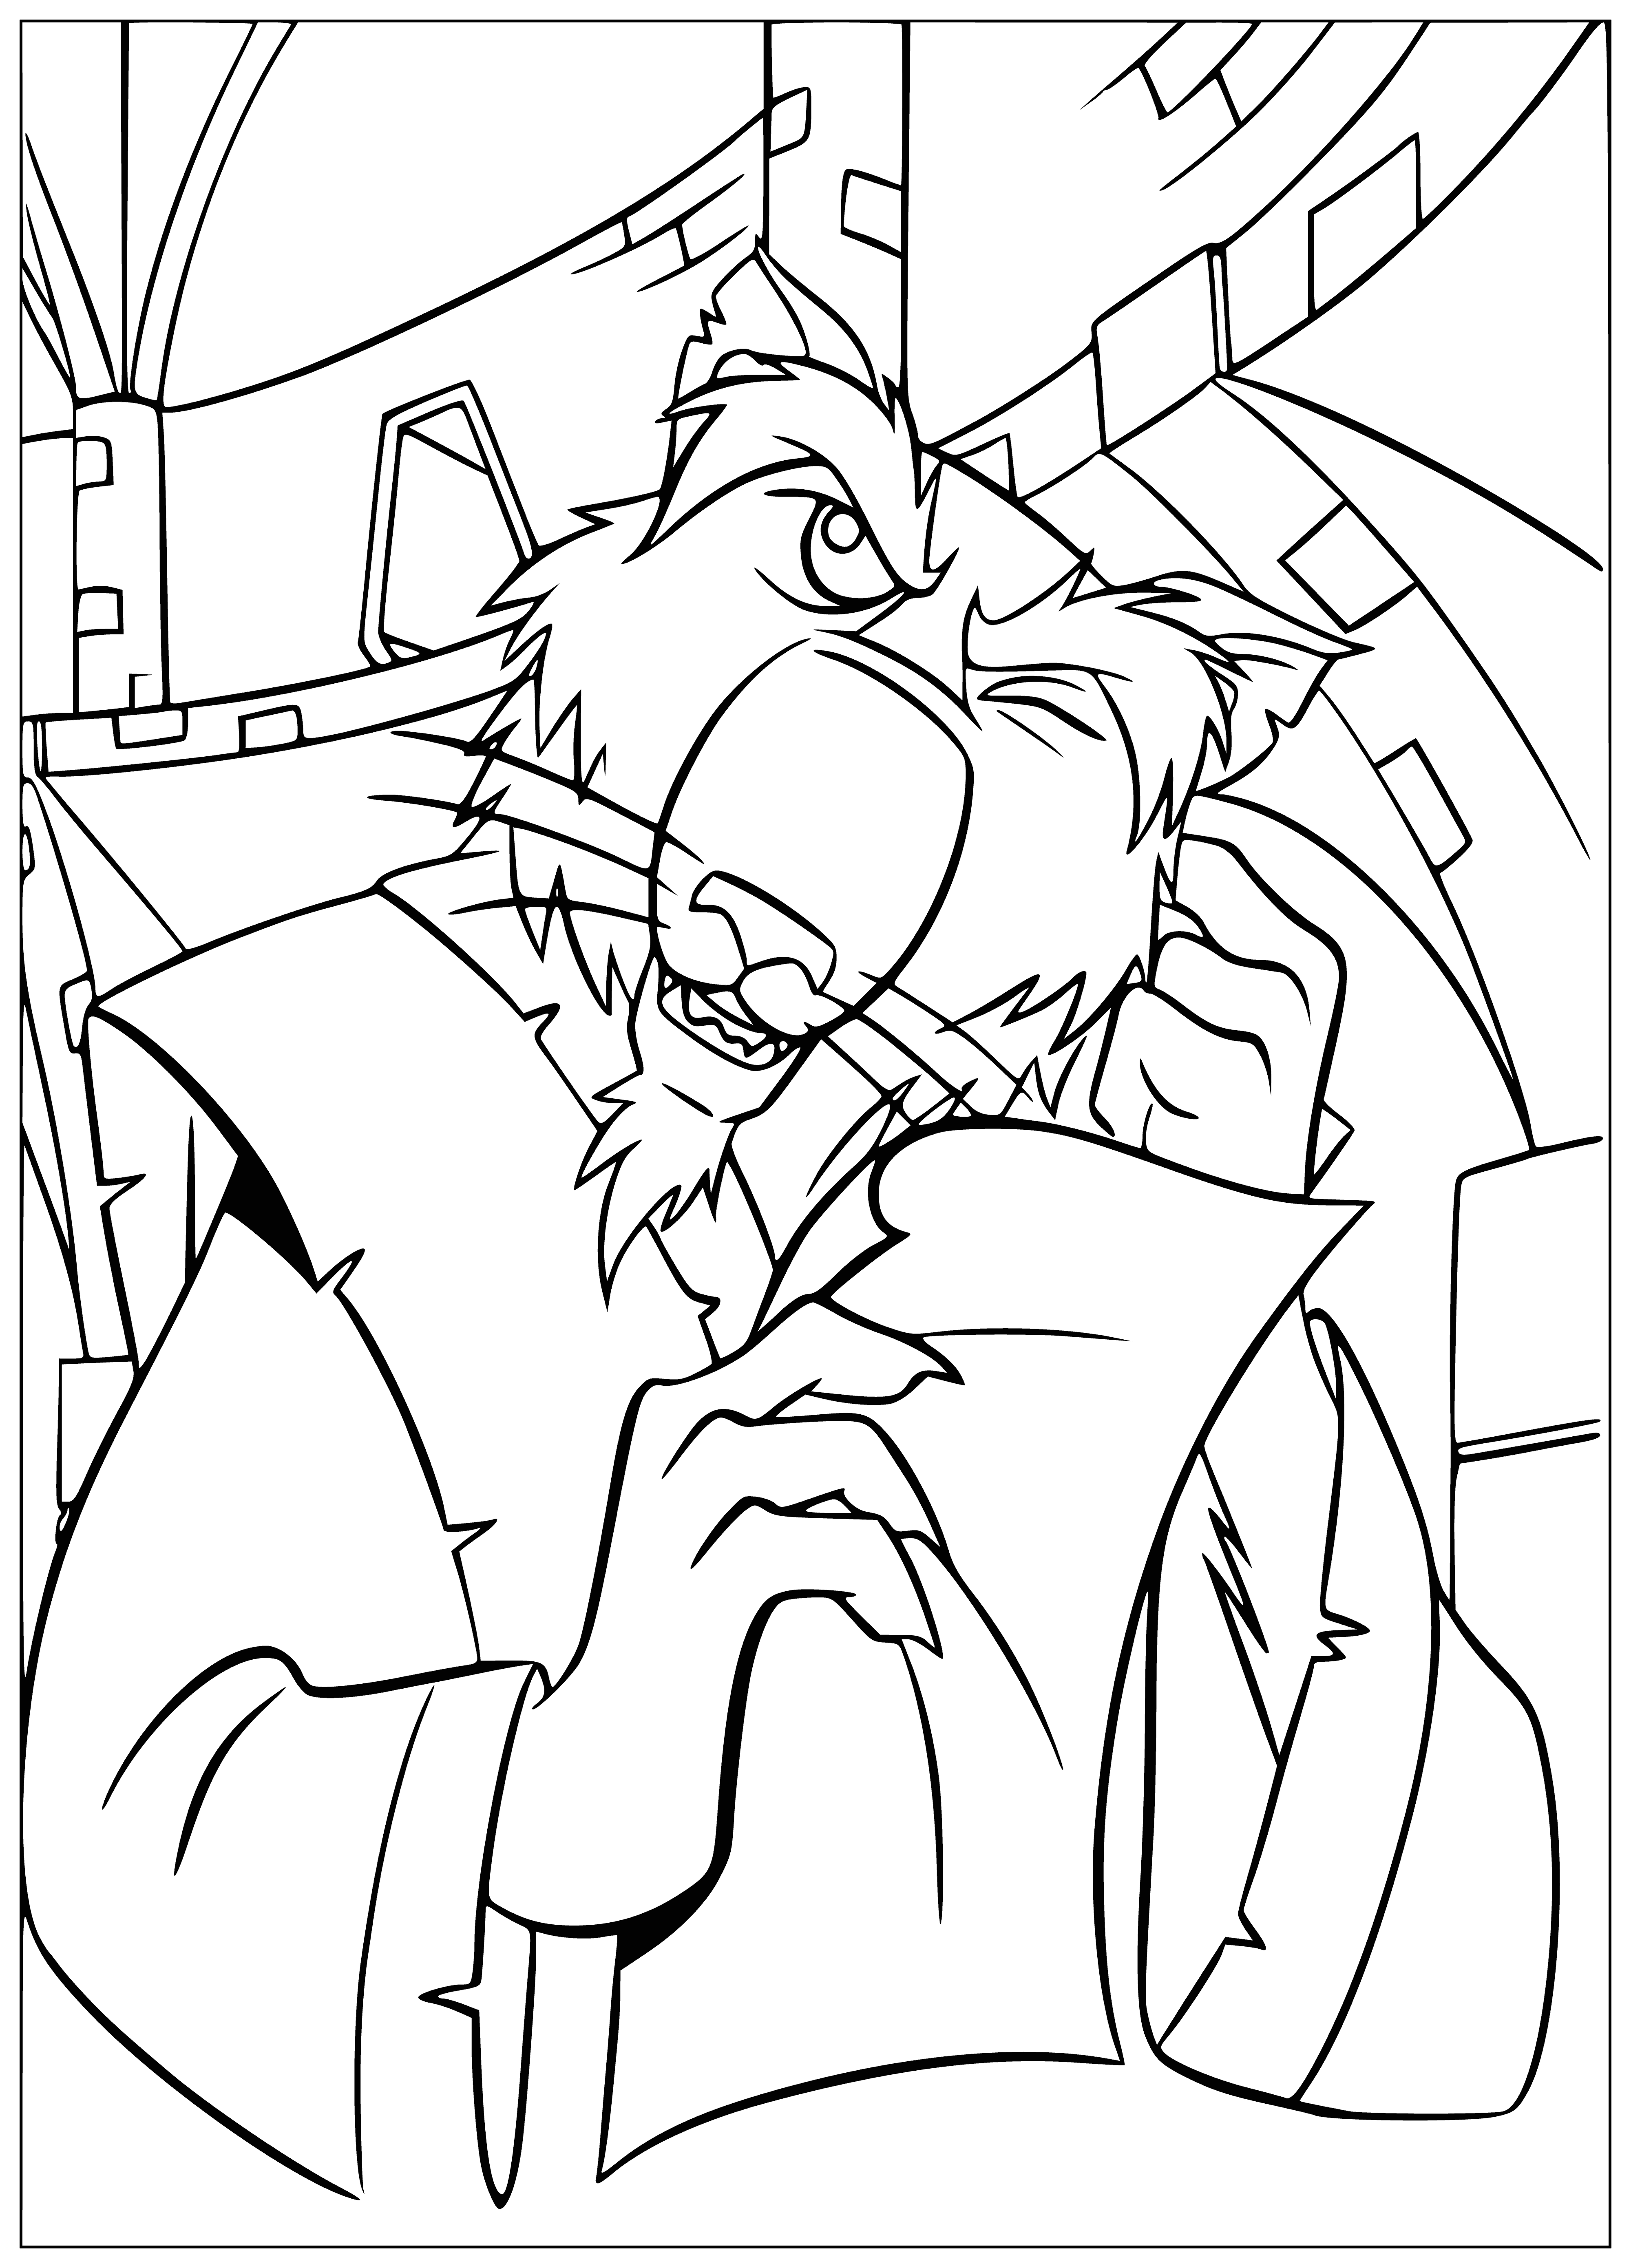 coloring page: A rat wearing brown robe, belt & sandals is featured in the coloring page.